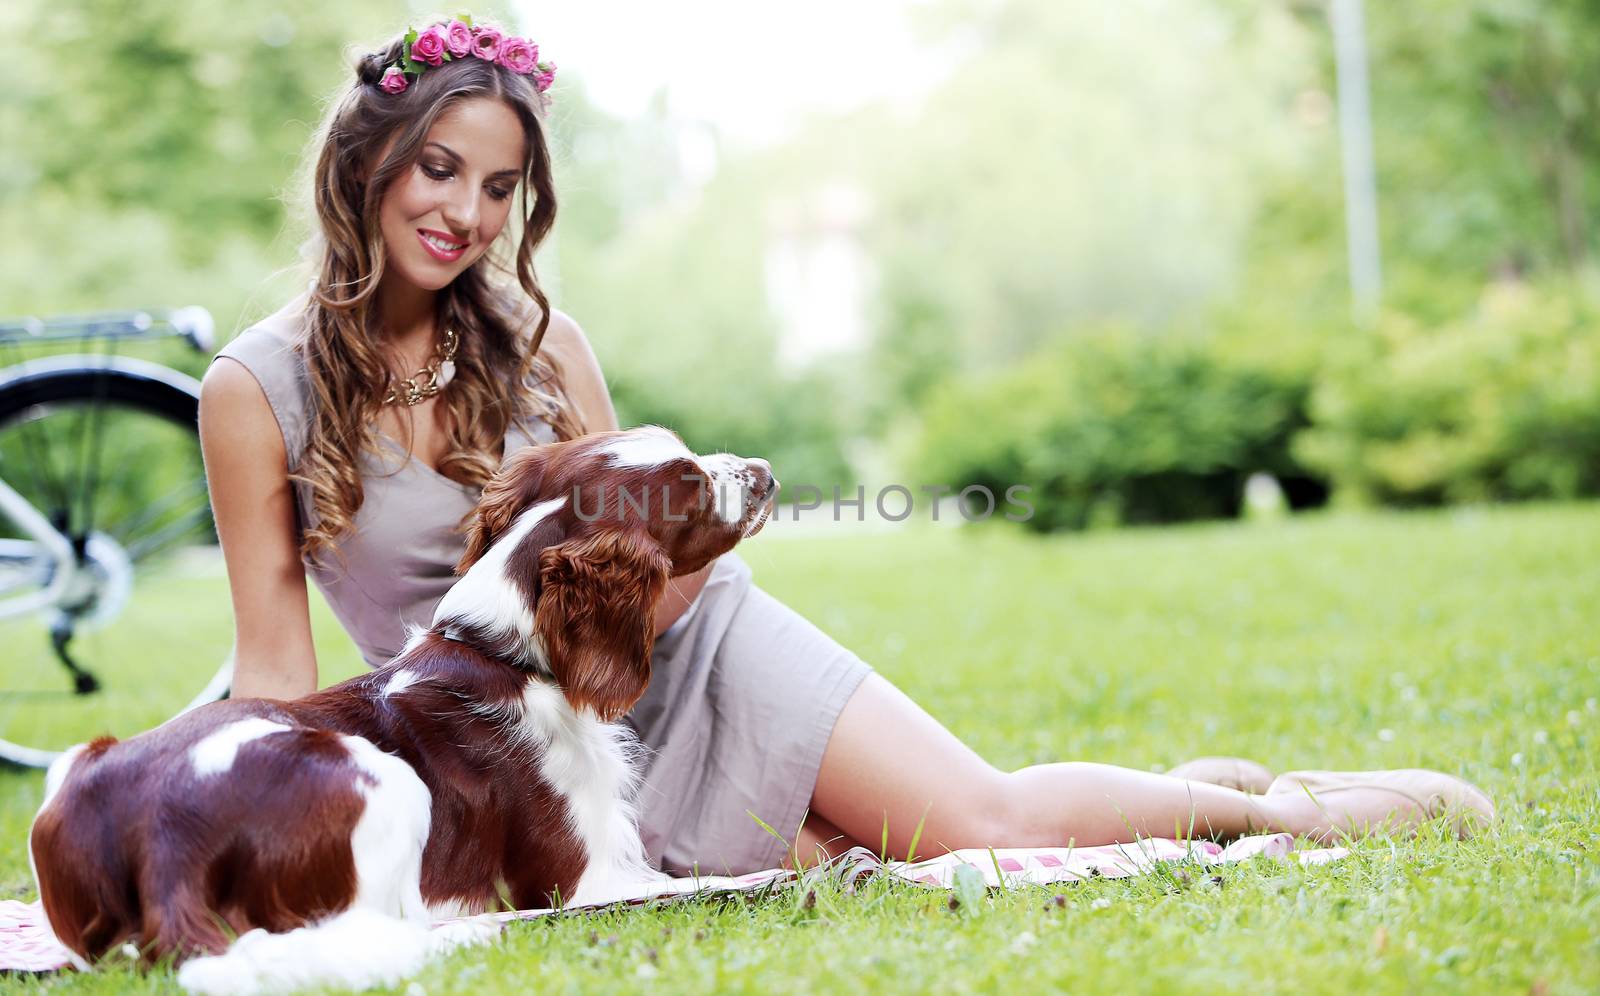 Portrait of a beautiful girl hanging out with a dog in a park